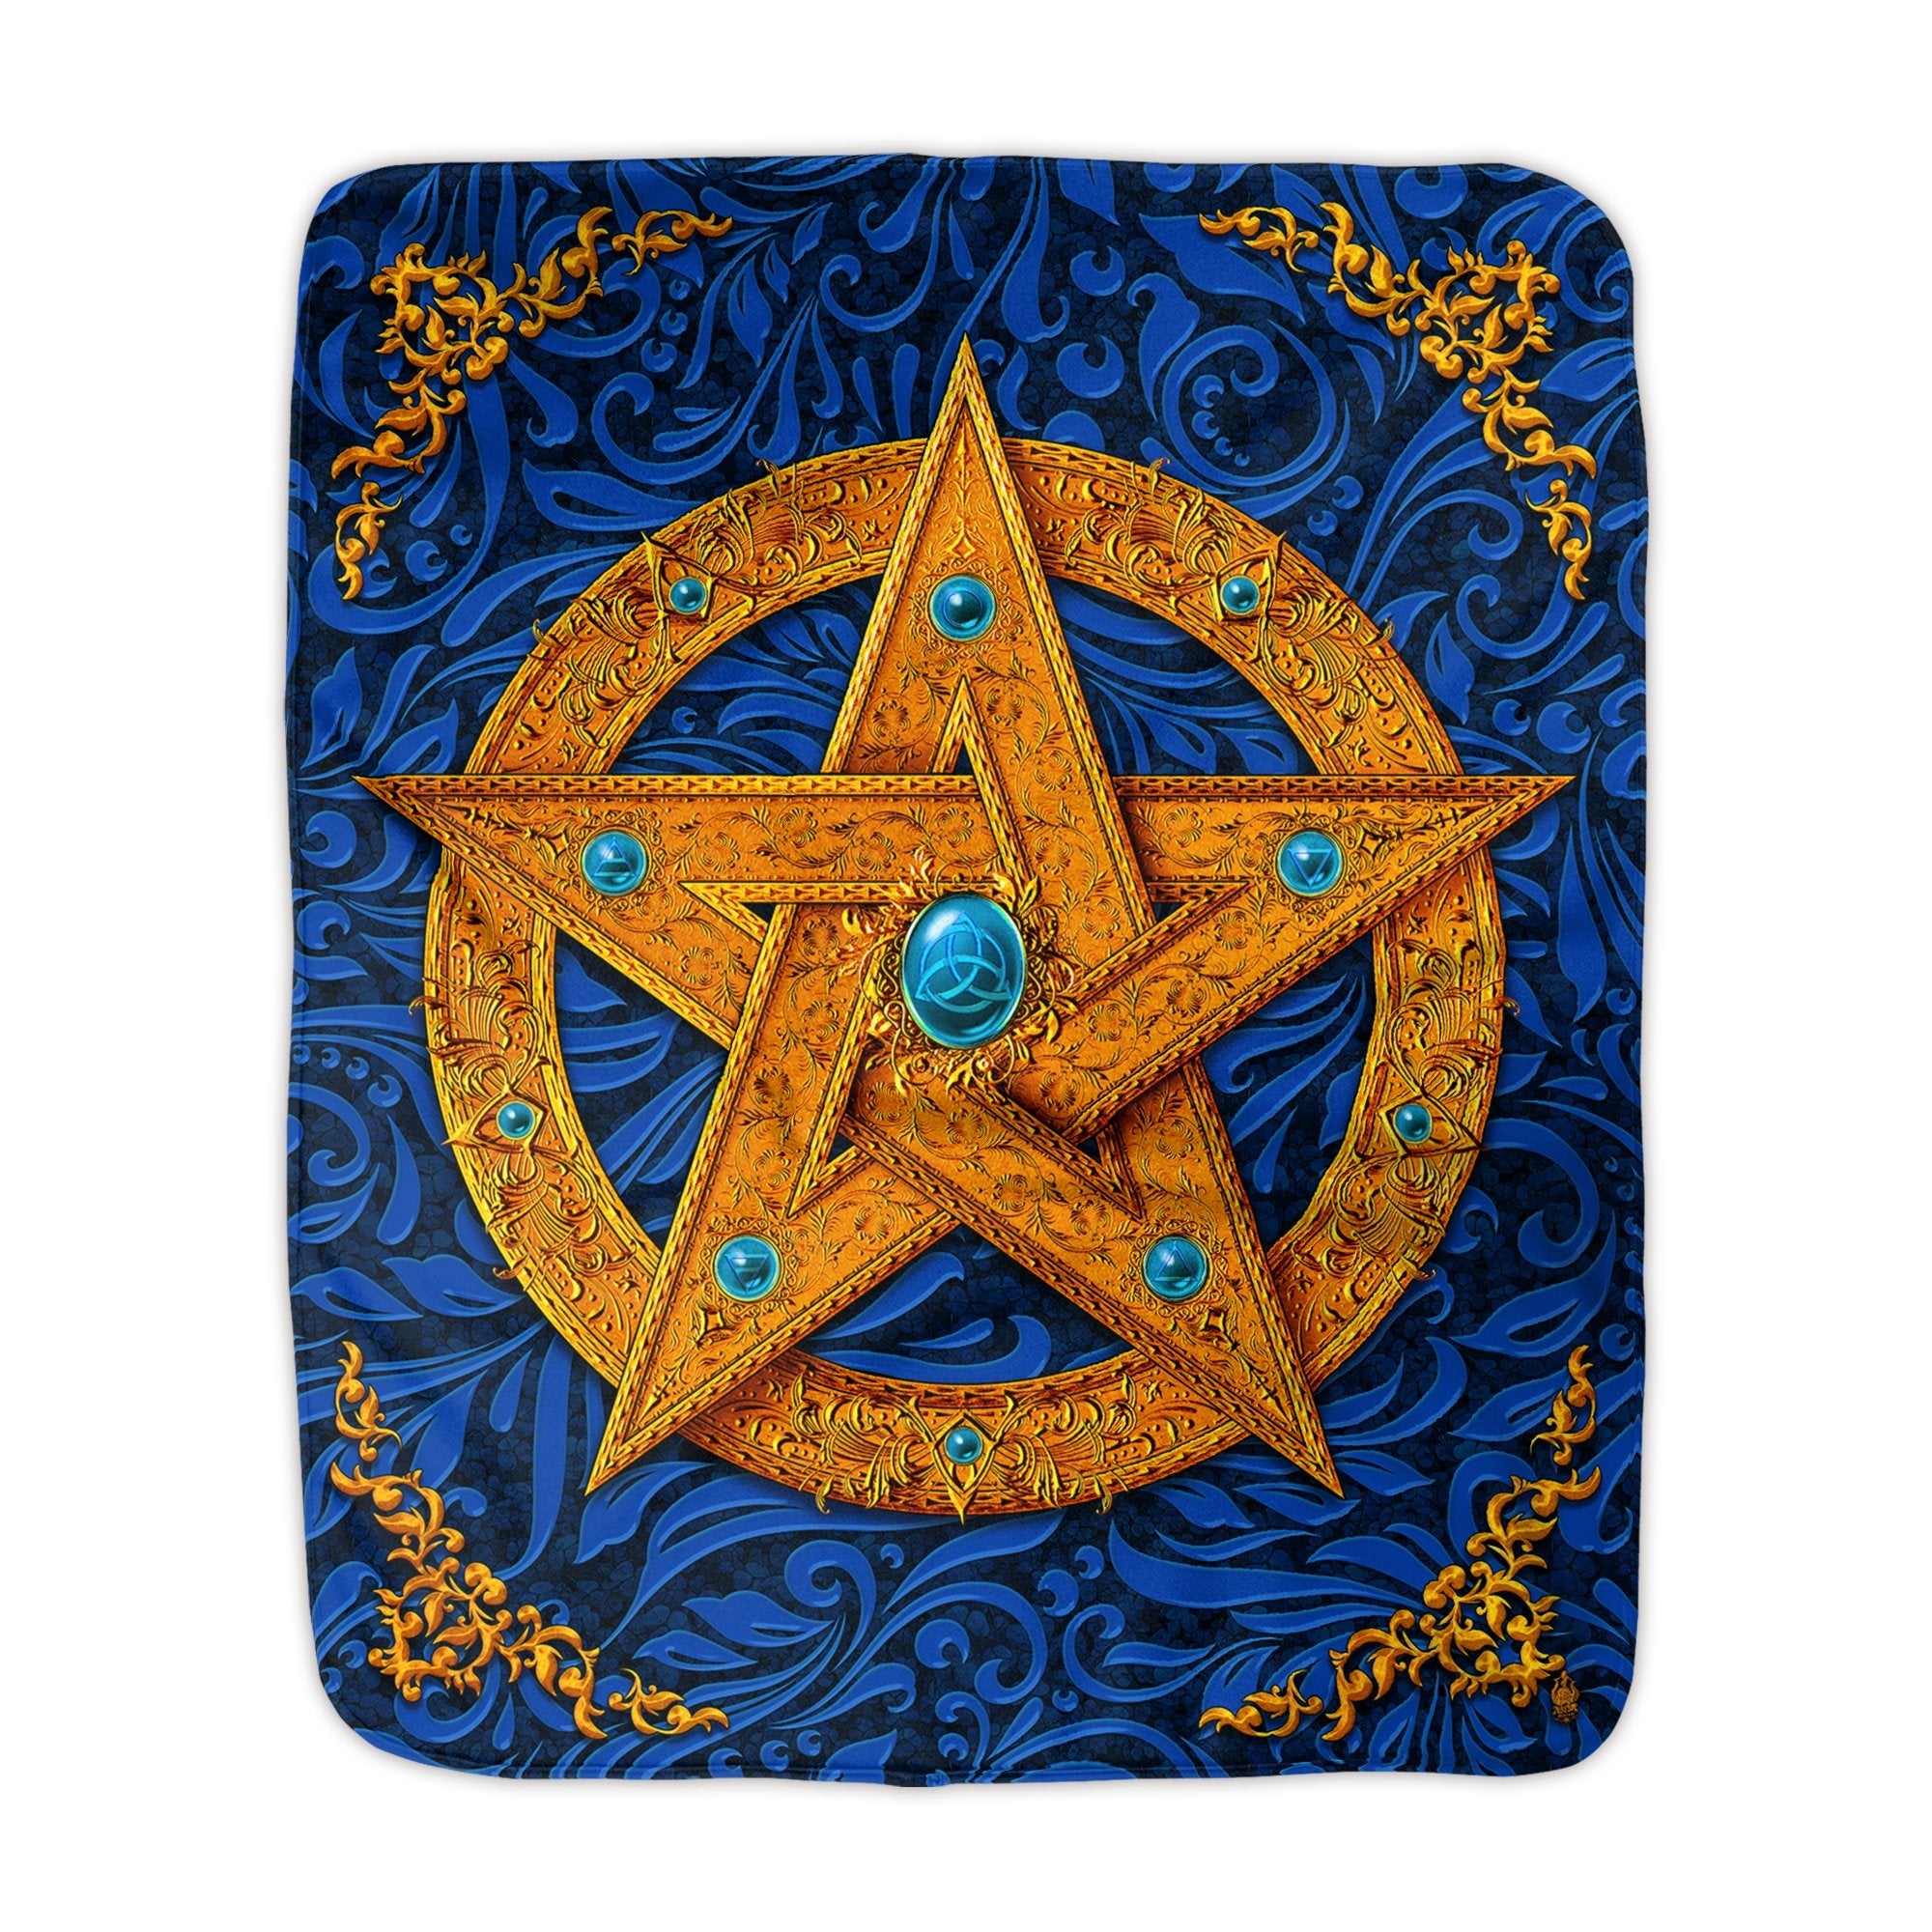 Pentacle Throw Fleece Blanket, Wiccan and Pagan Decor, Witchy Room - Blue - Abysm Internal